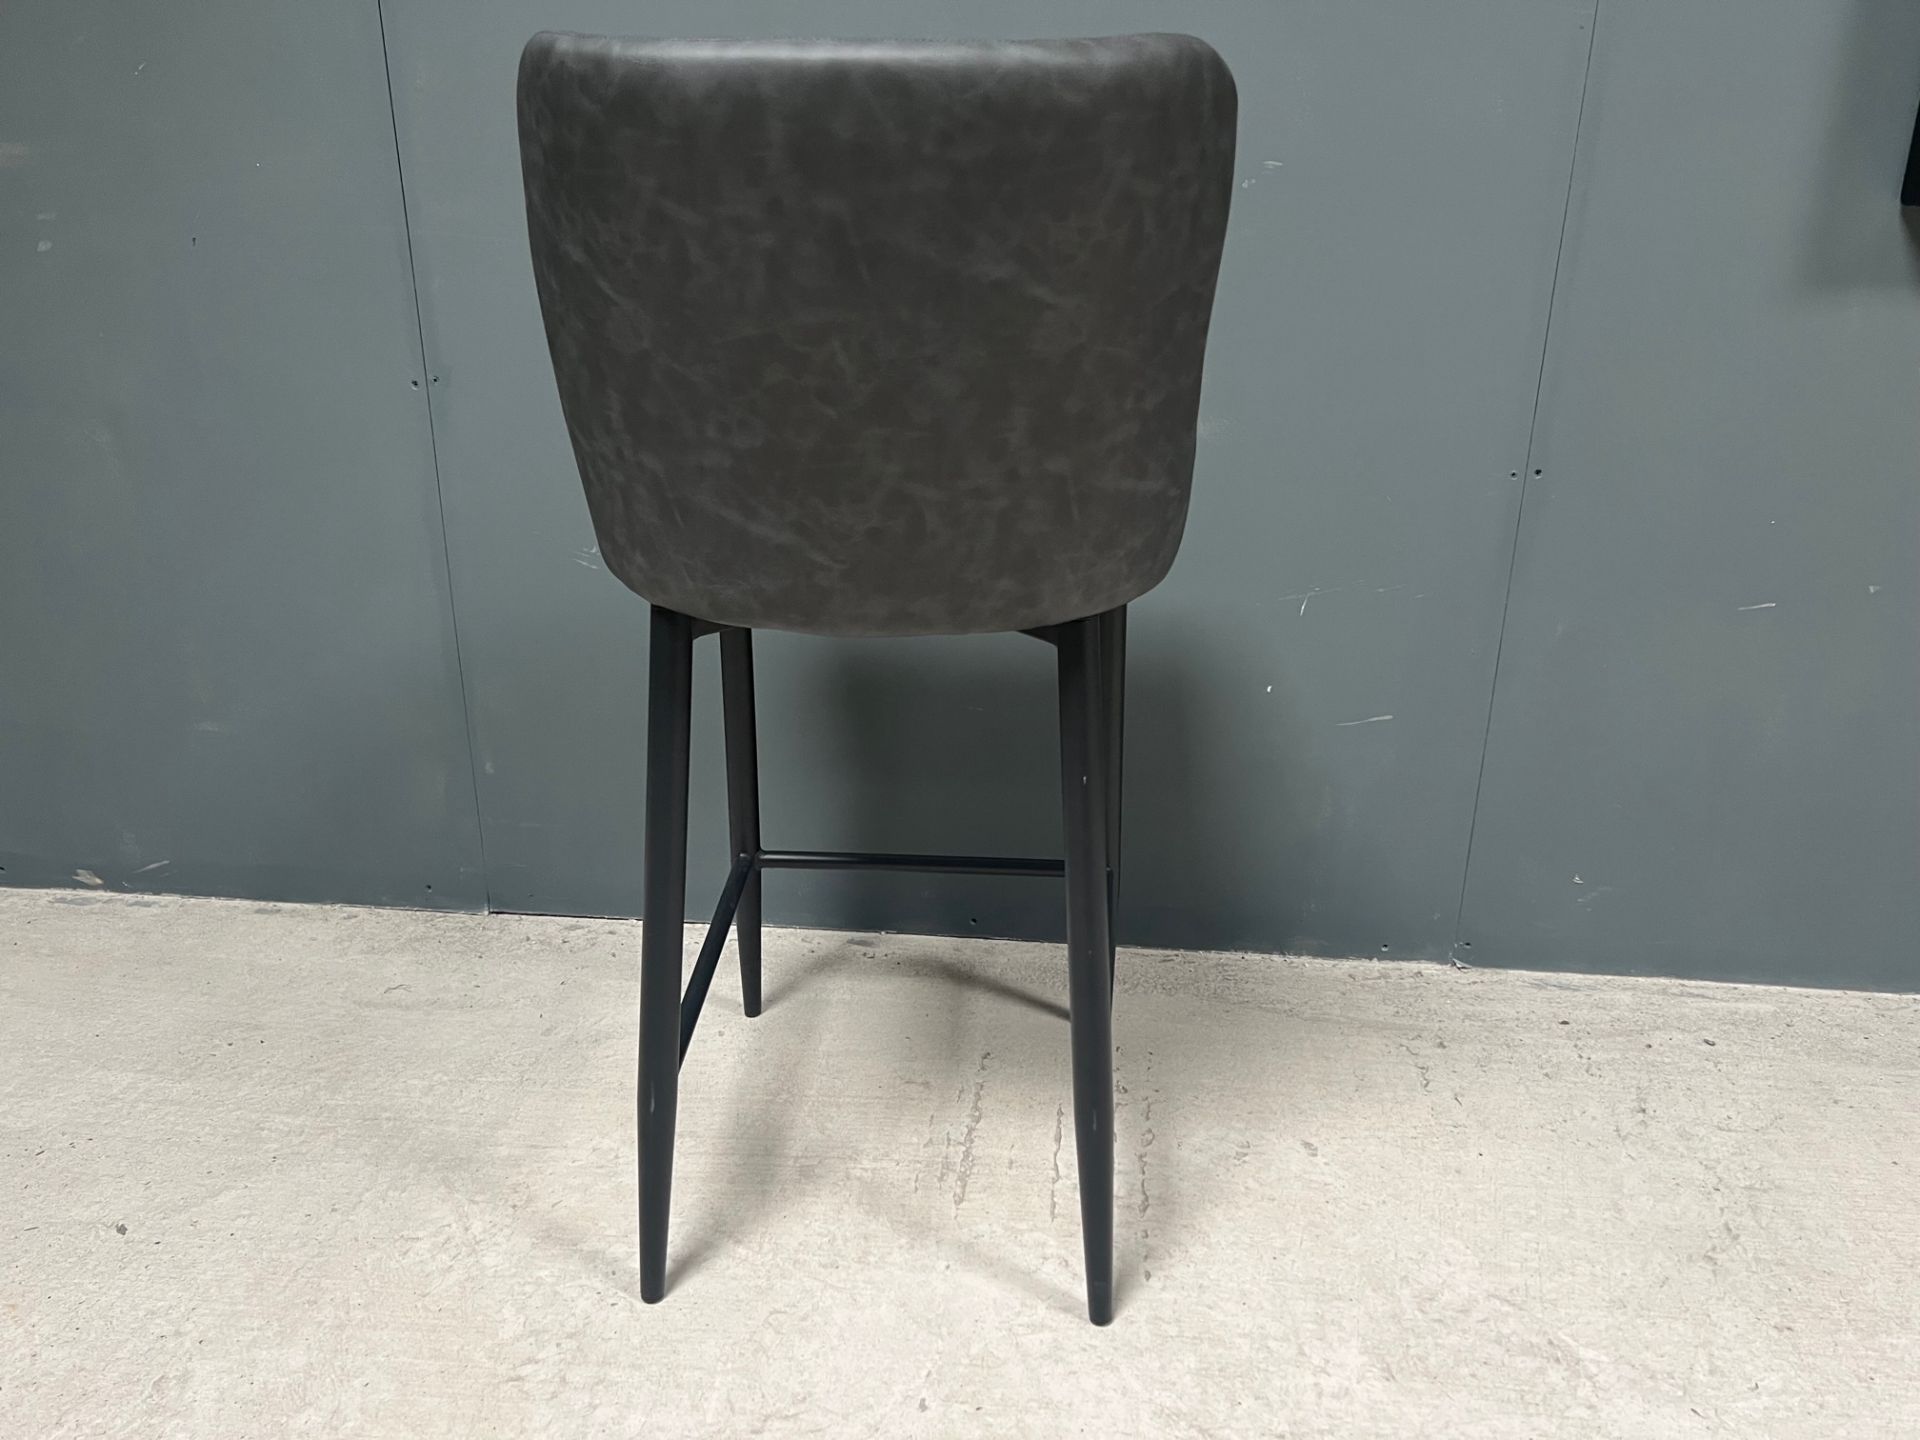 Boxed New Pair Of Classic Faux Leather High Bar Stools In Charcoal - Image 3 of 5